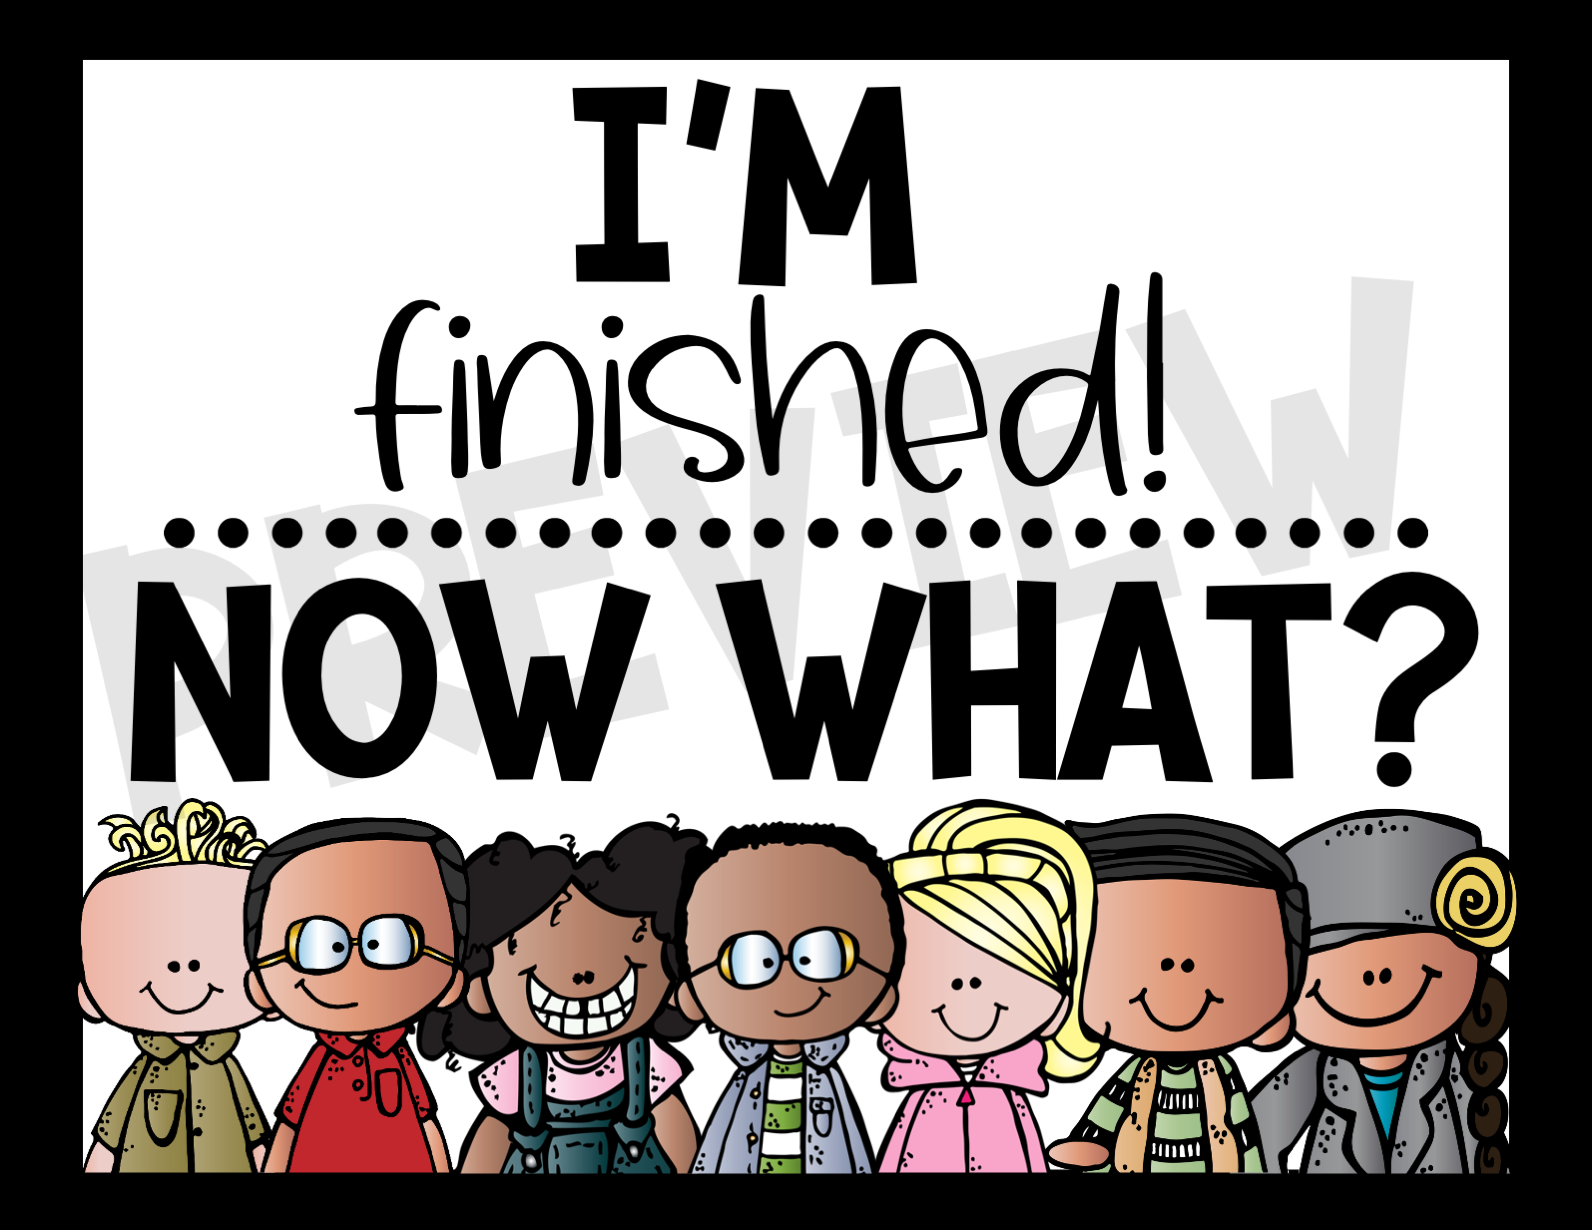 I'm Finished! Now What?